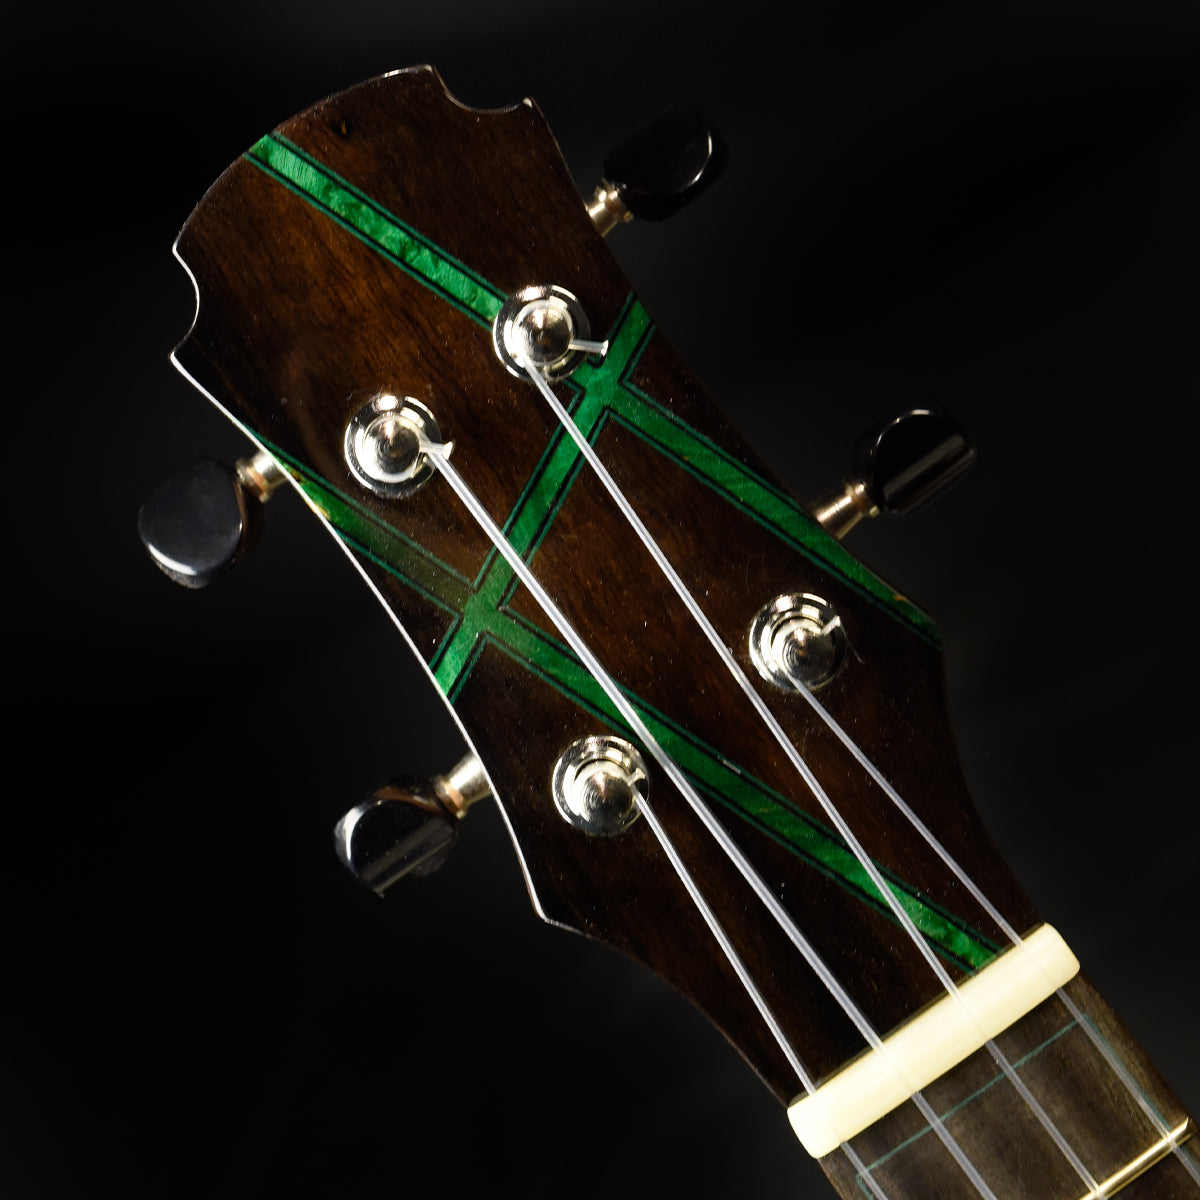 Green Label Tenor Red Cedar with Indian Rosewood (Green)